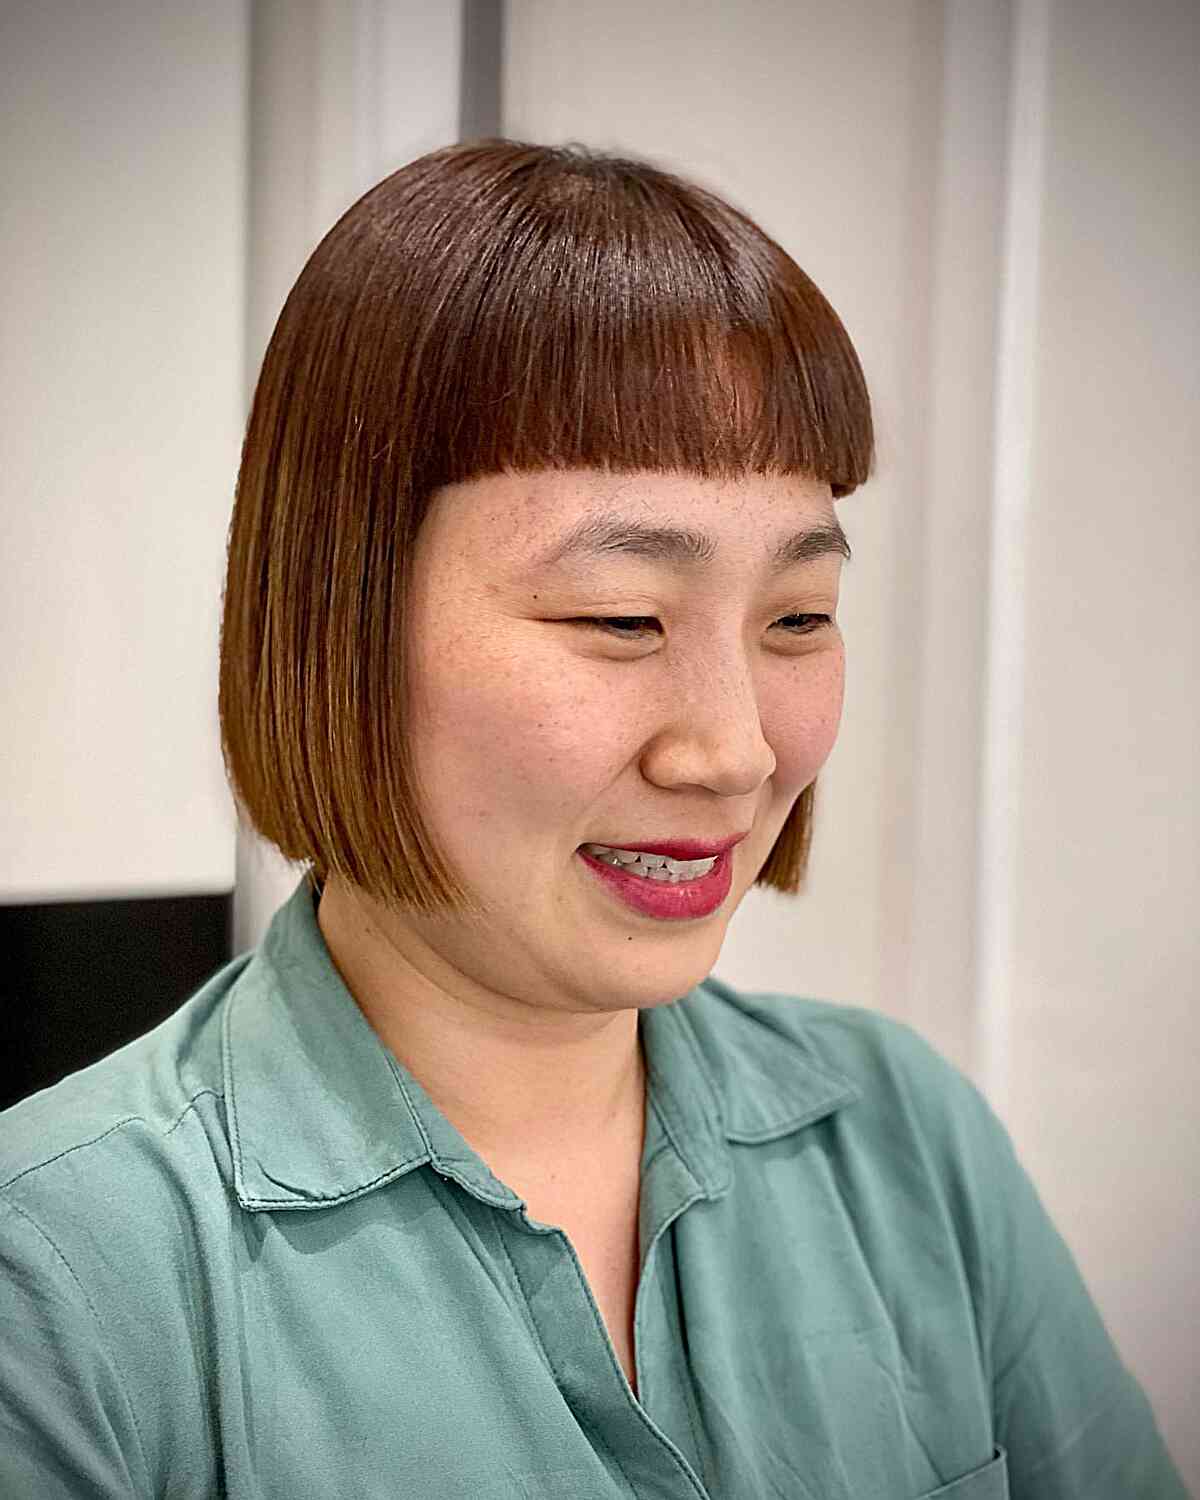 Mini Sleek Bob with Blunt Bangs for Asian Women with Fuller Faces